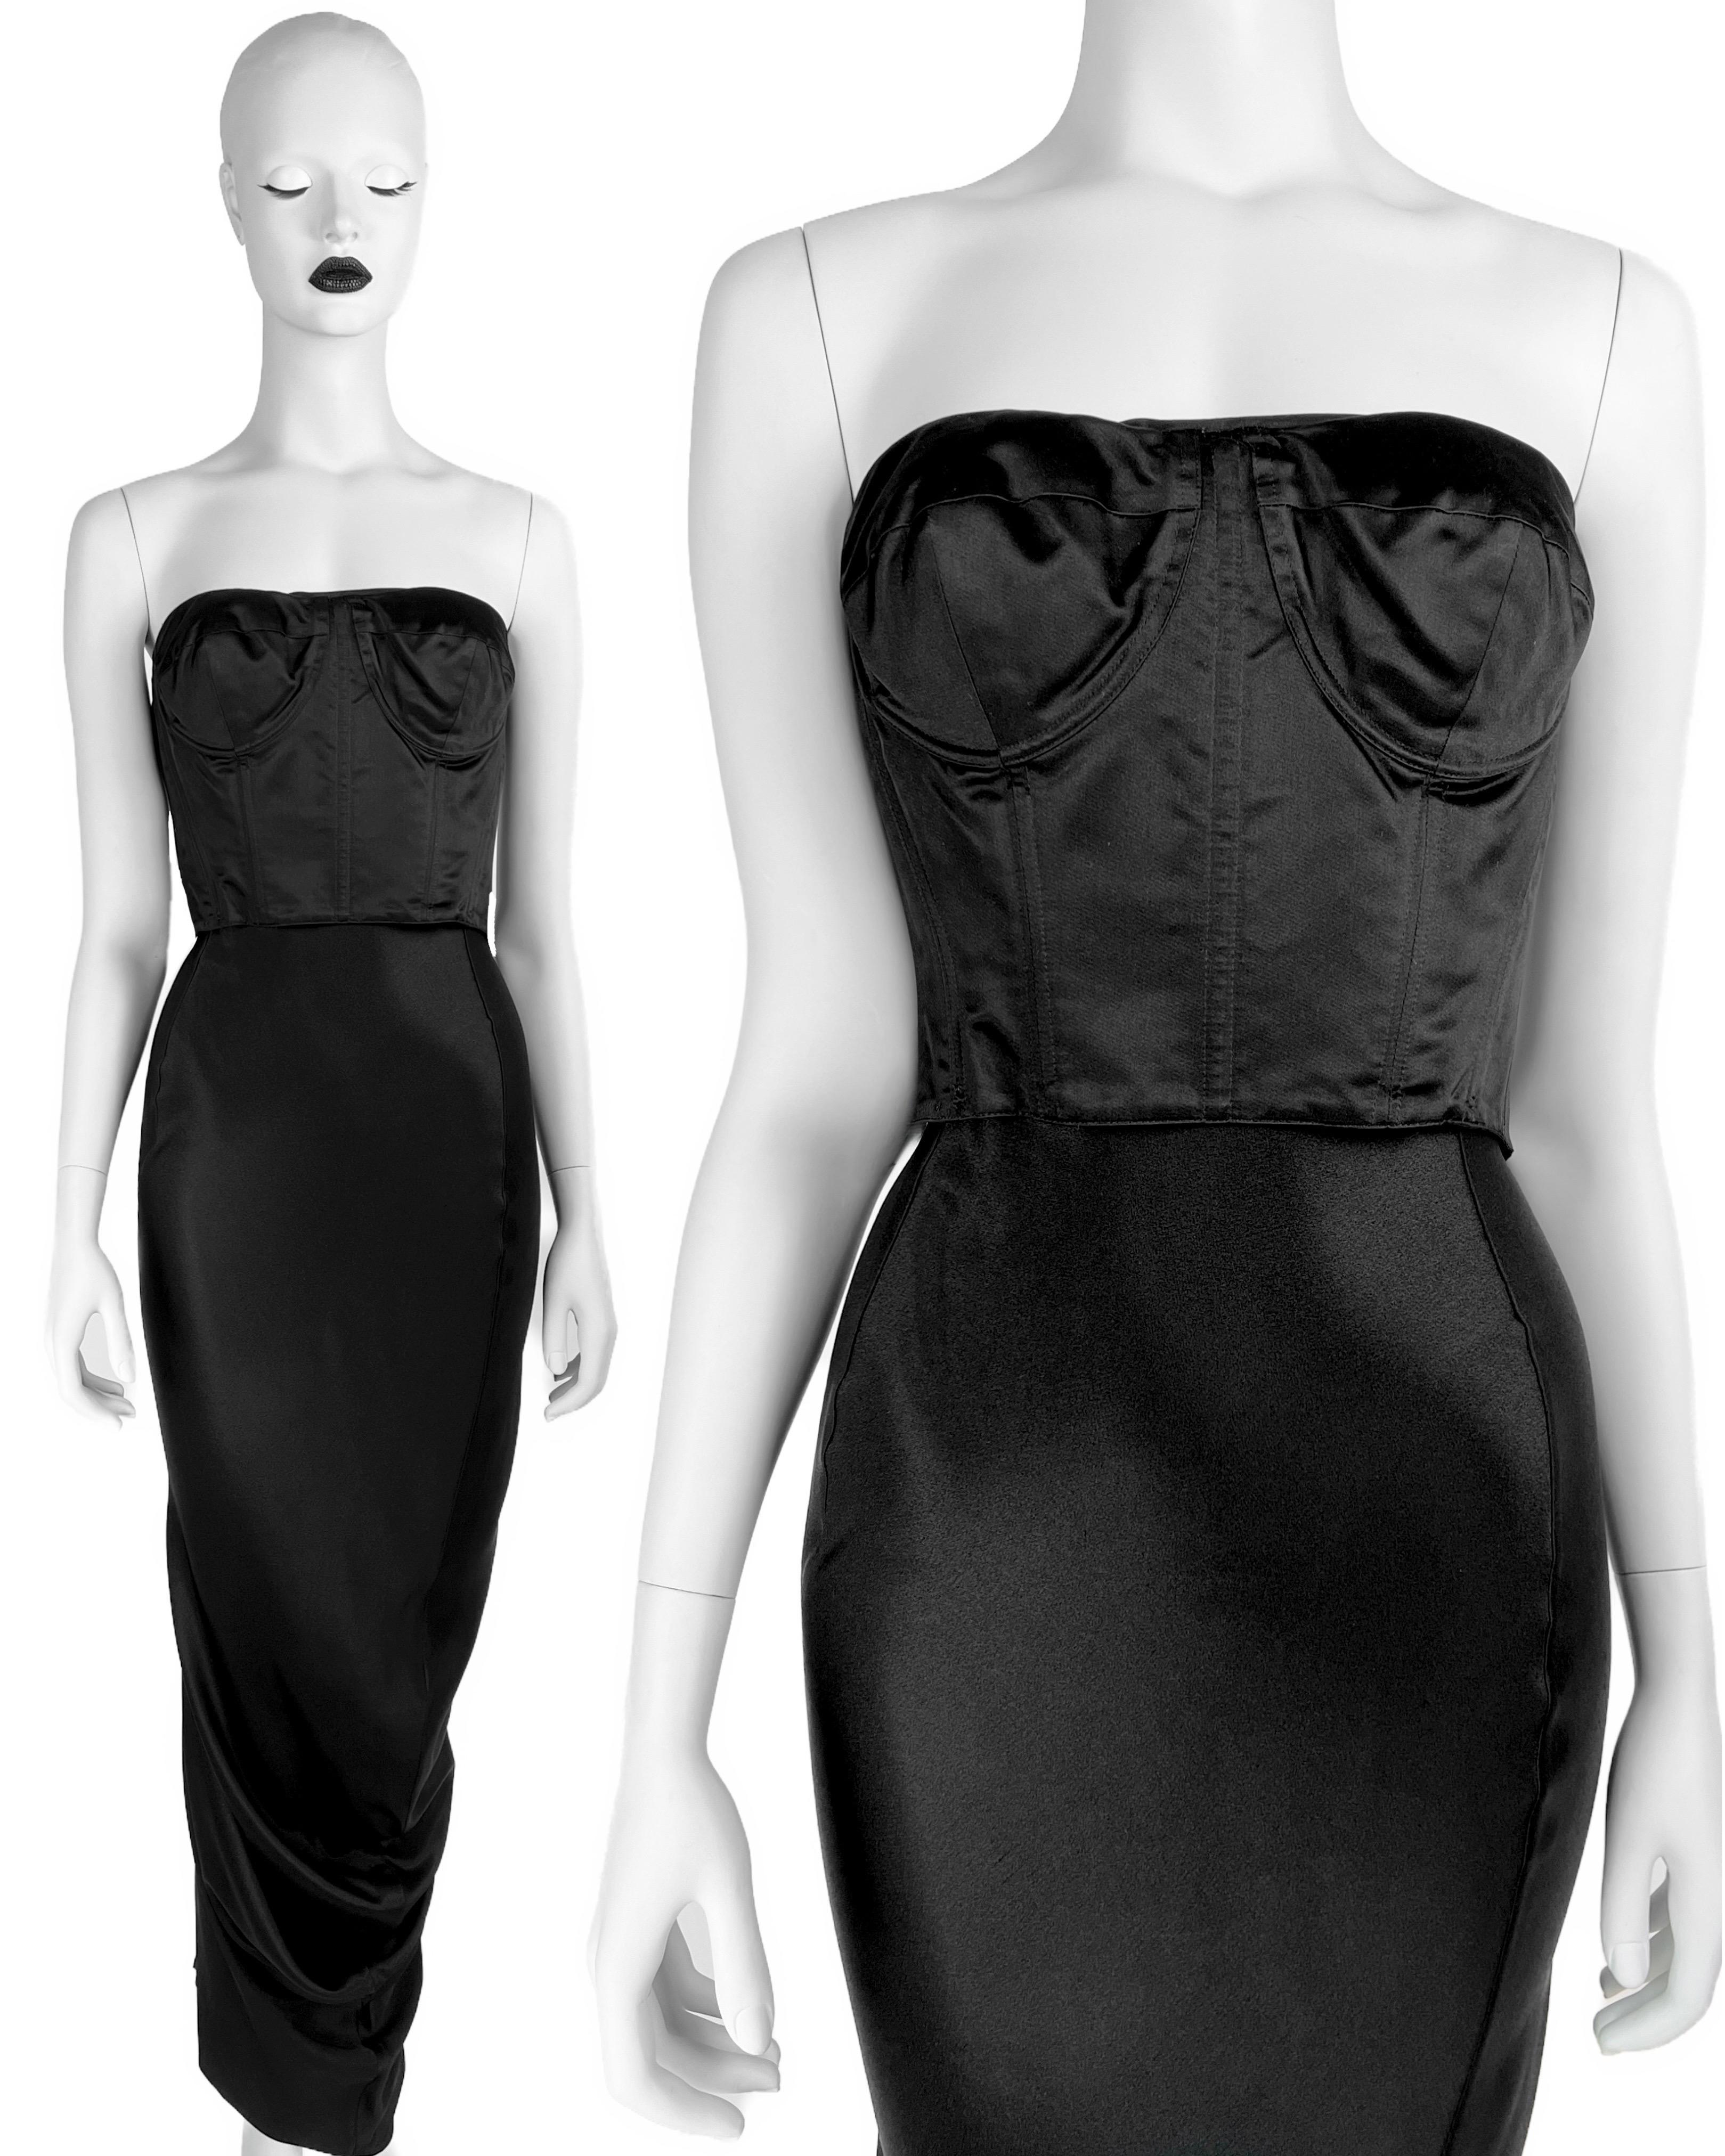 As seen in another fabric on the runway, this stunning sample of John Galliano Fall 1995 Corseted Gown in fabulous black! This dress can be worn TWO WAYS: with a corset facing outwards and inwards. Same style but in blue and short version was seen